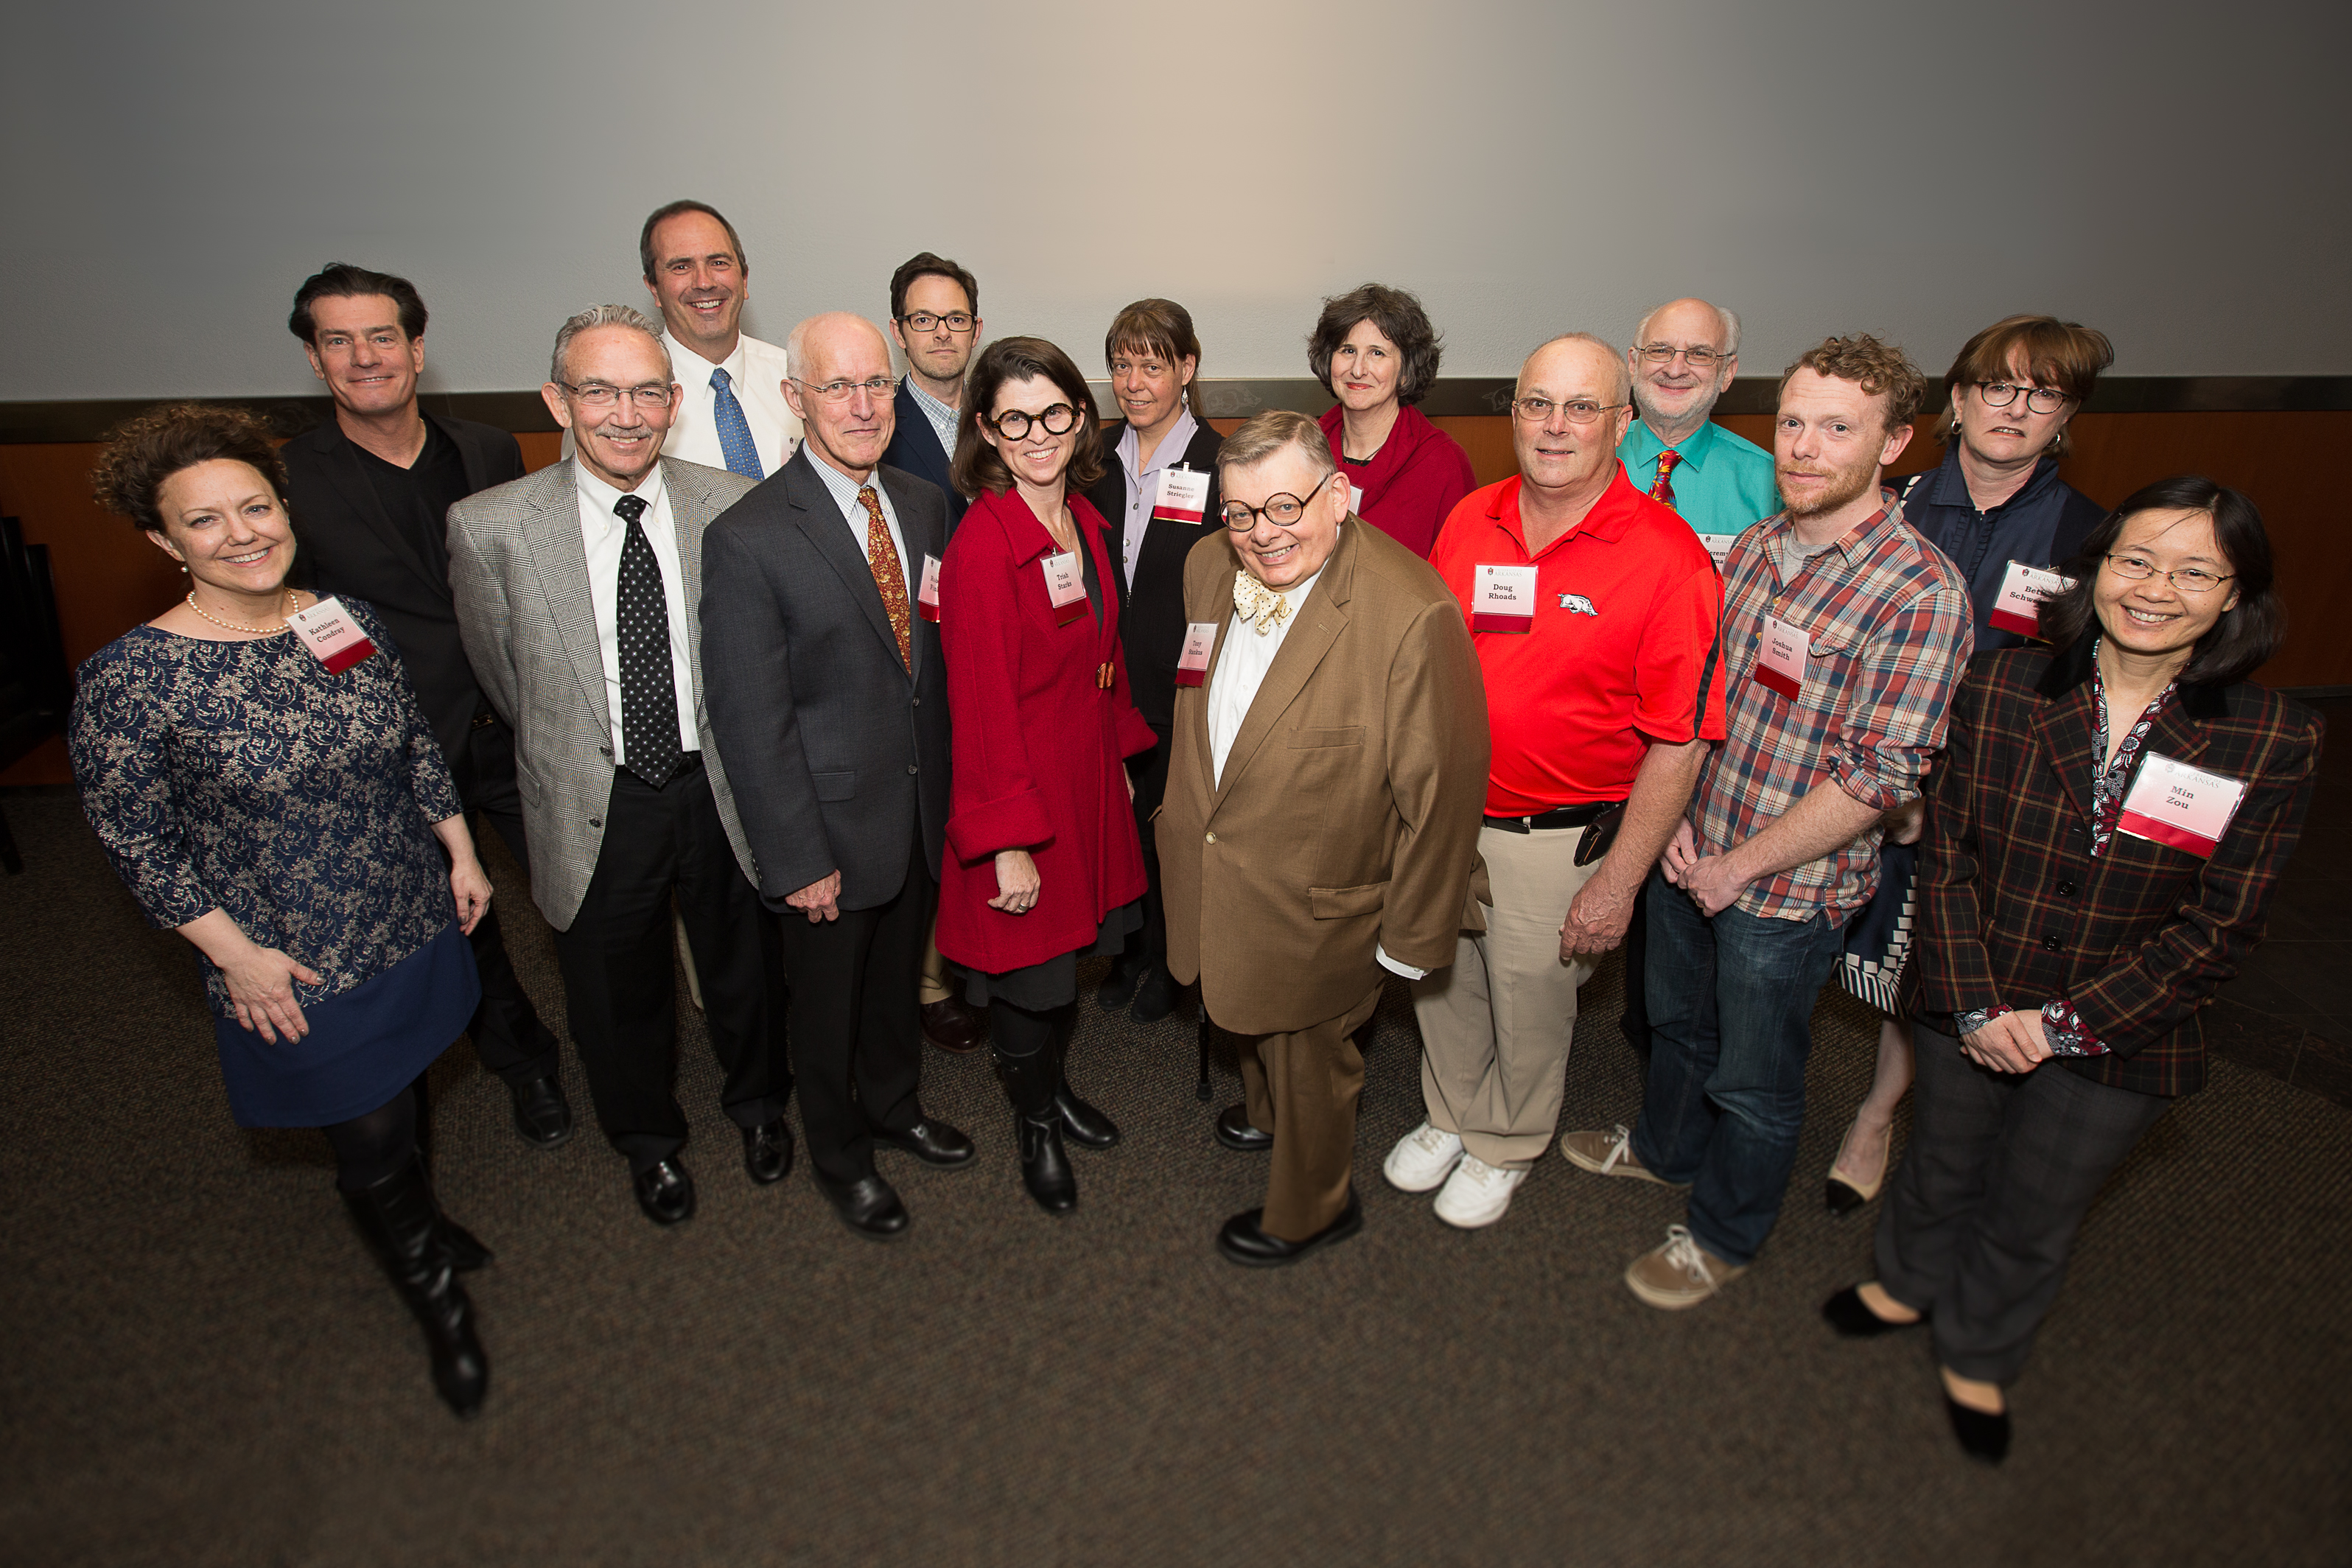 University of Arkansas faculty and staff who were recognized for their research awards and attended the Faculty Award Recognition Program reception on April 27.